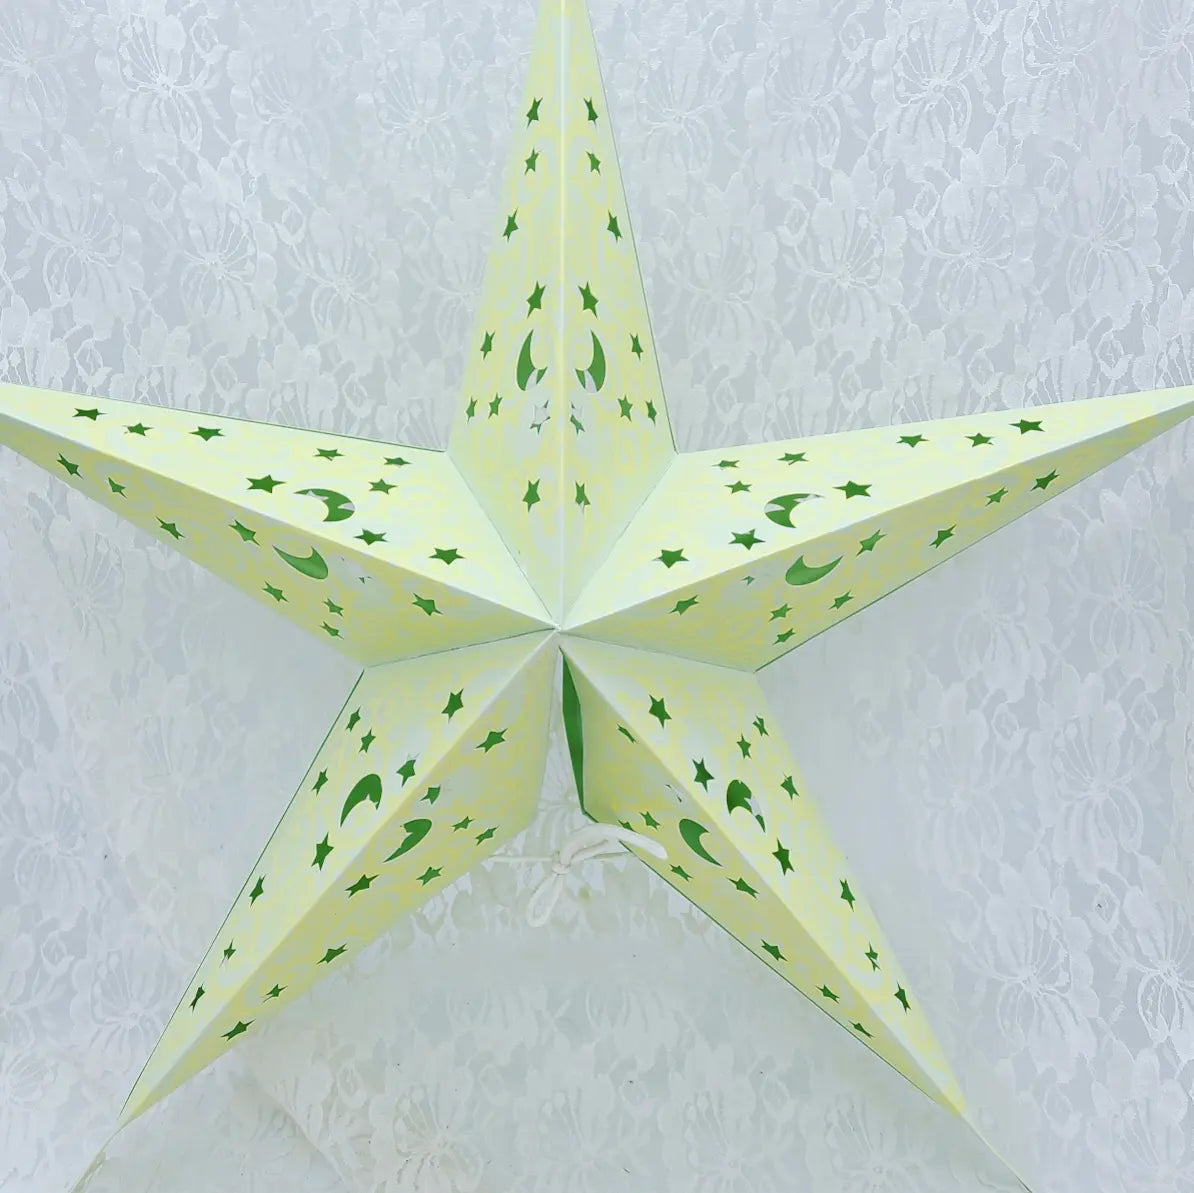 Set of Three (3) Paper Star Moon & Stars Cut Out Folding Lamp Decorations